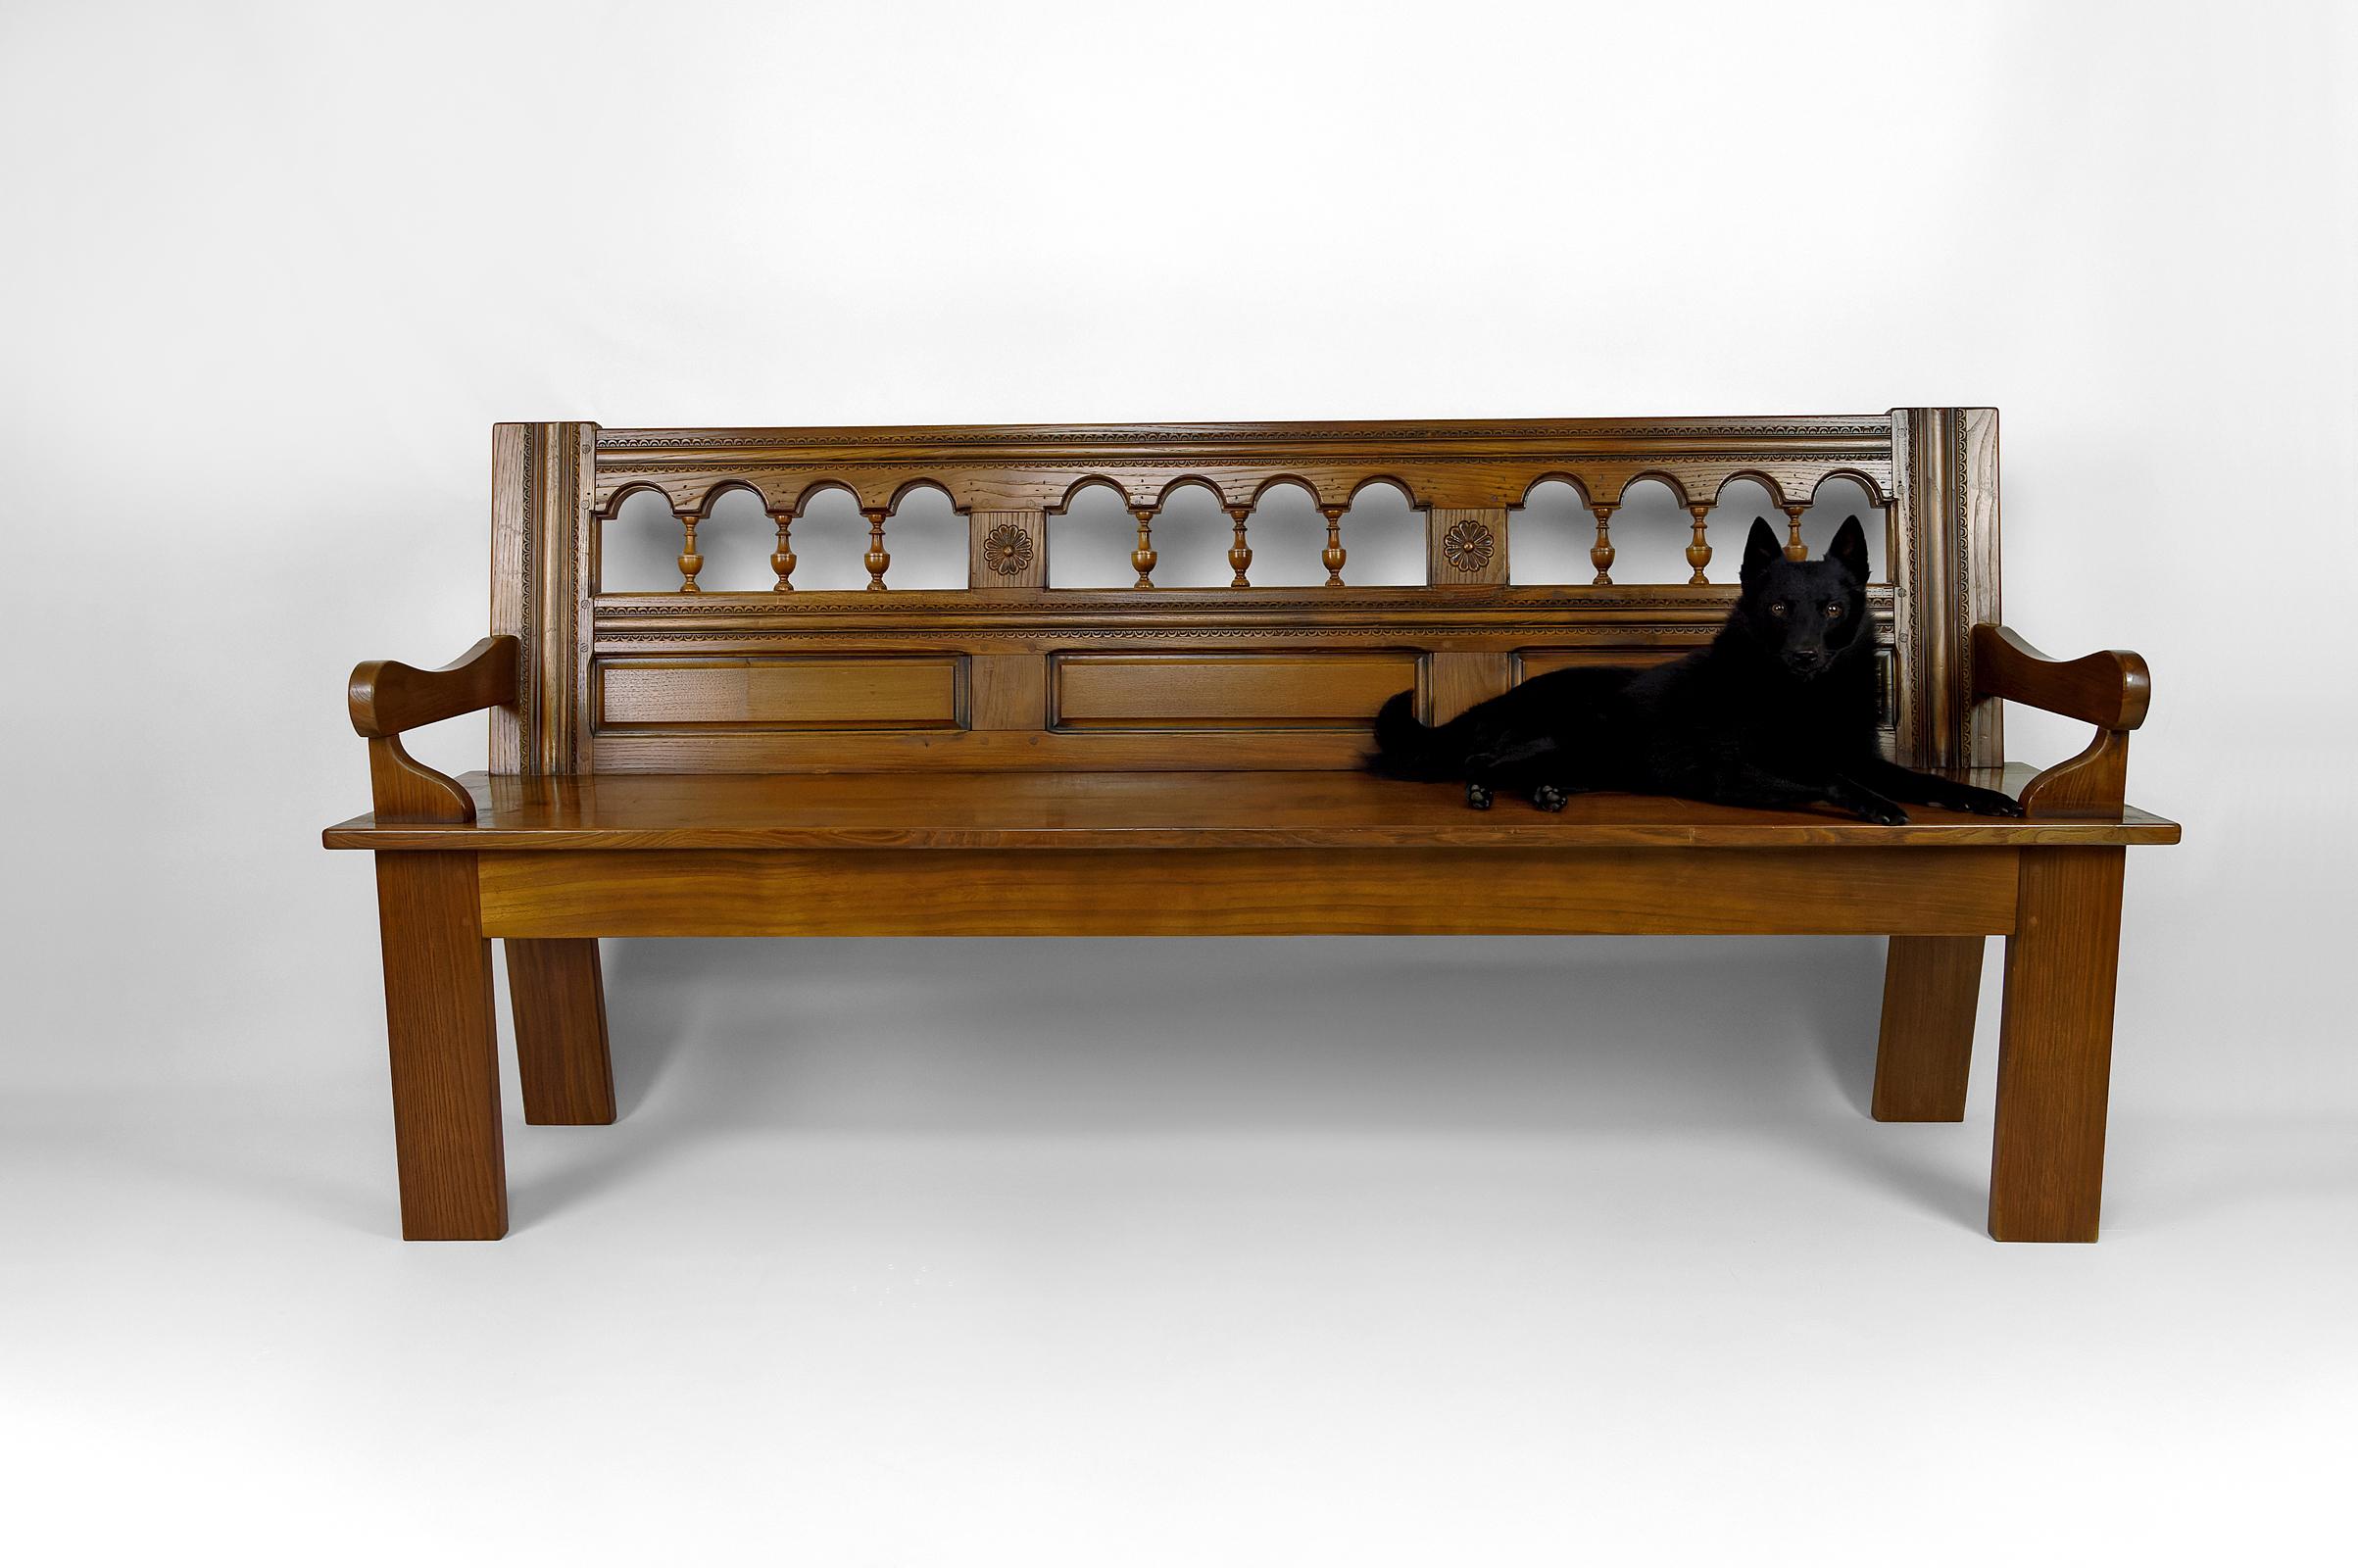 French Provincial Rustic Carved Oak Farmhouse Bench, France, 20th century